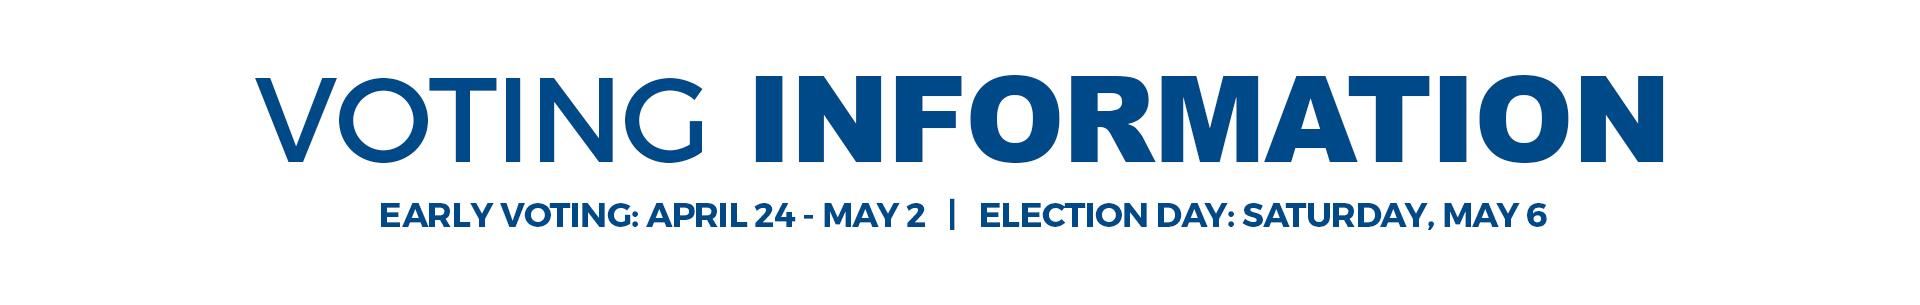 VOTING INFORMATION Early Voting: April 24 - May 2   |   Election Day: Saturday, May 6